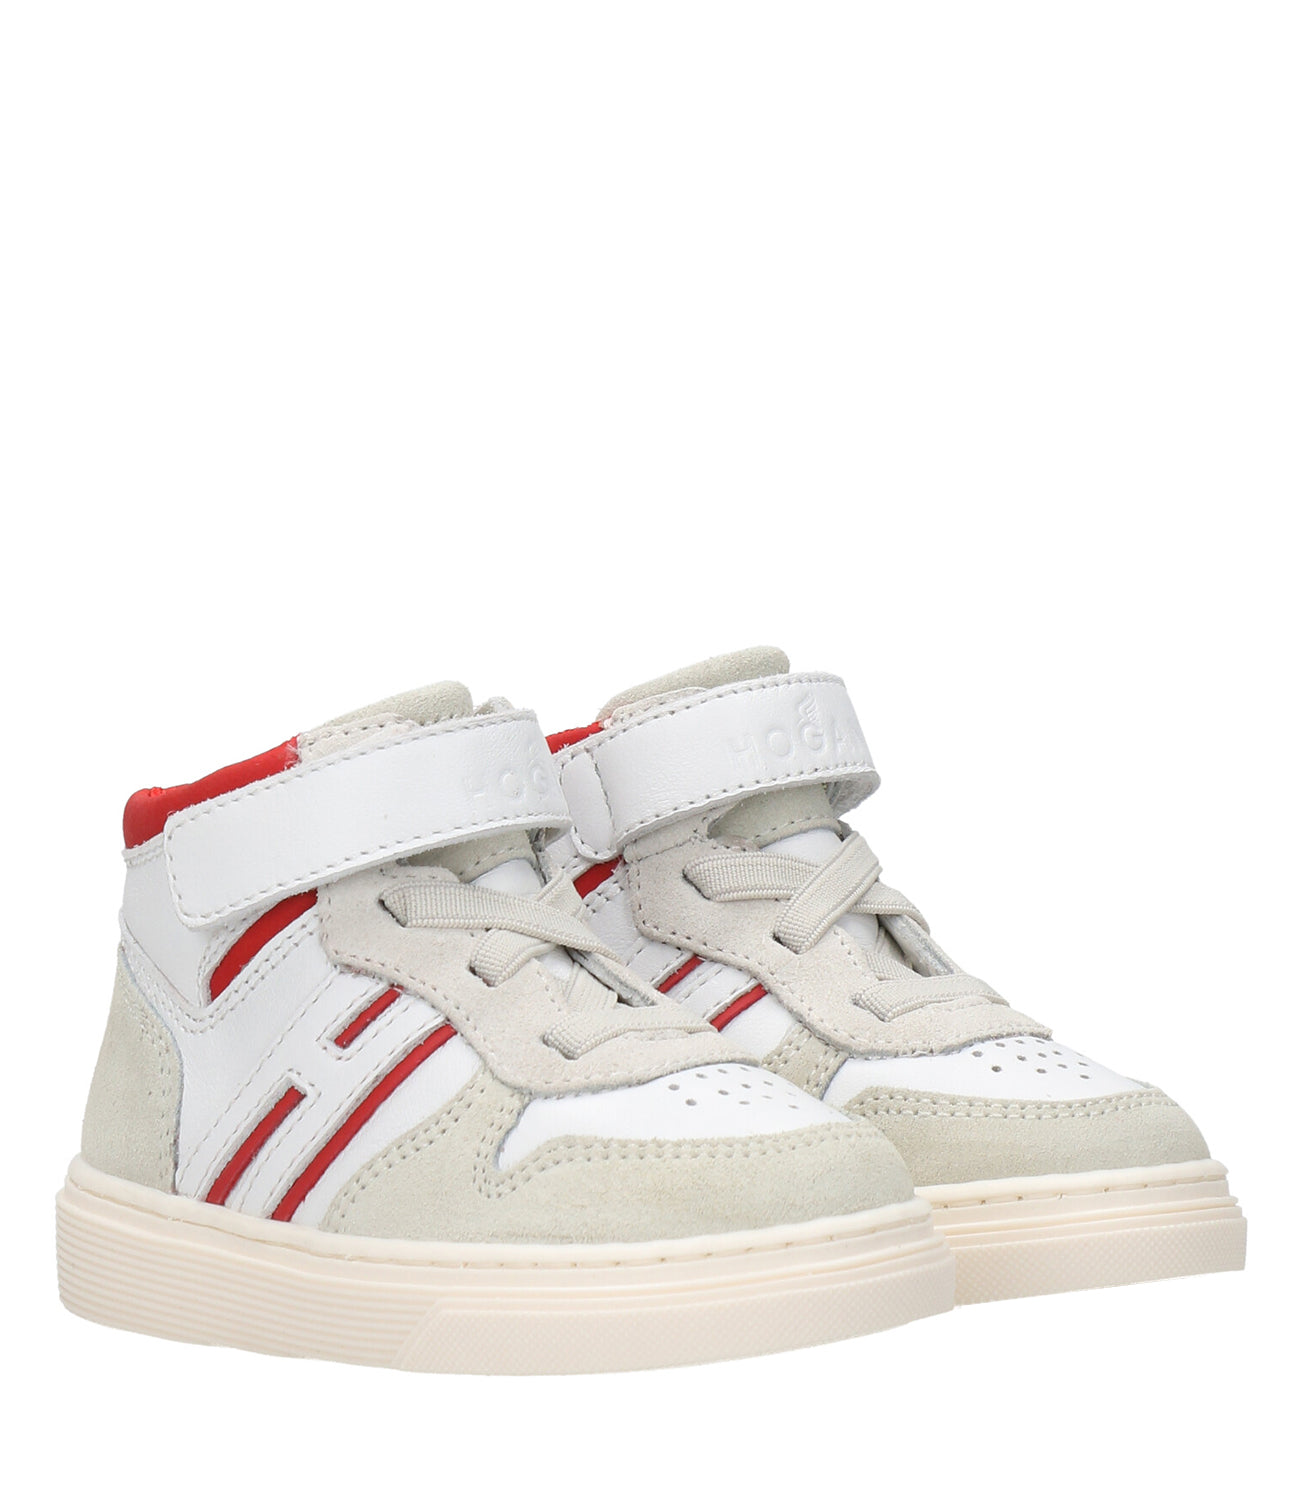 Hogan Junior | Red and White Sneakers